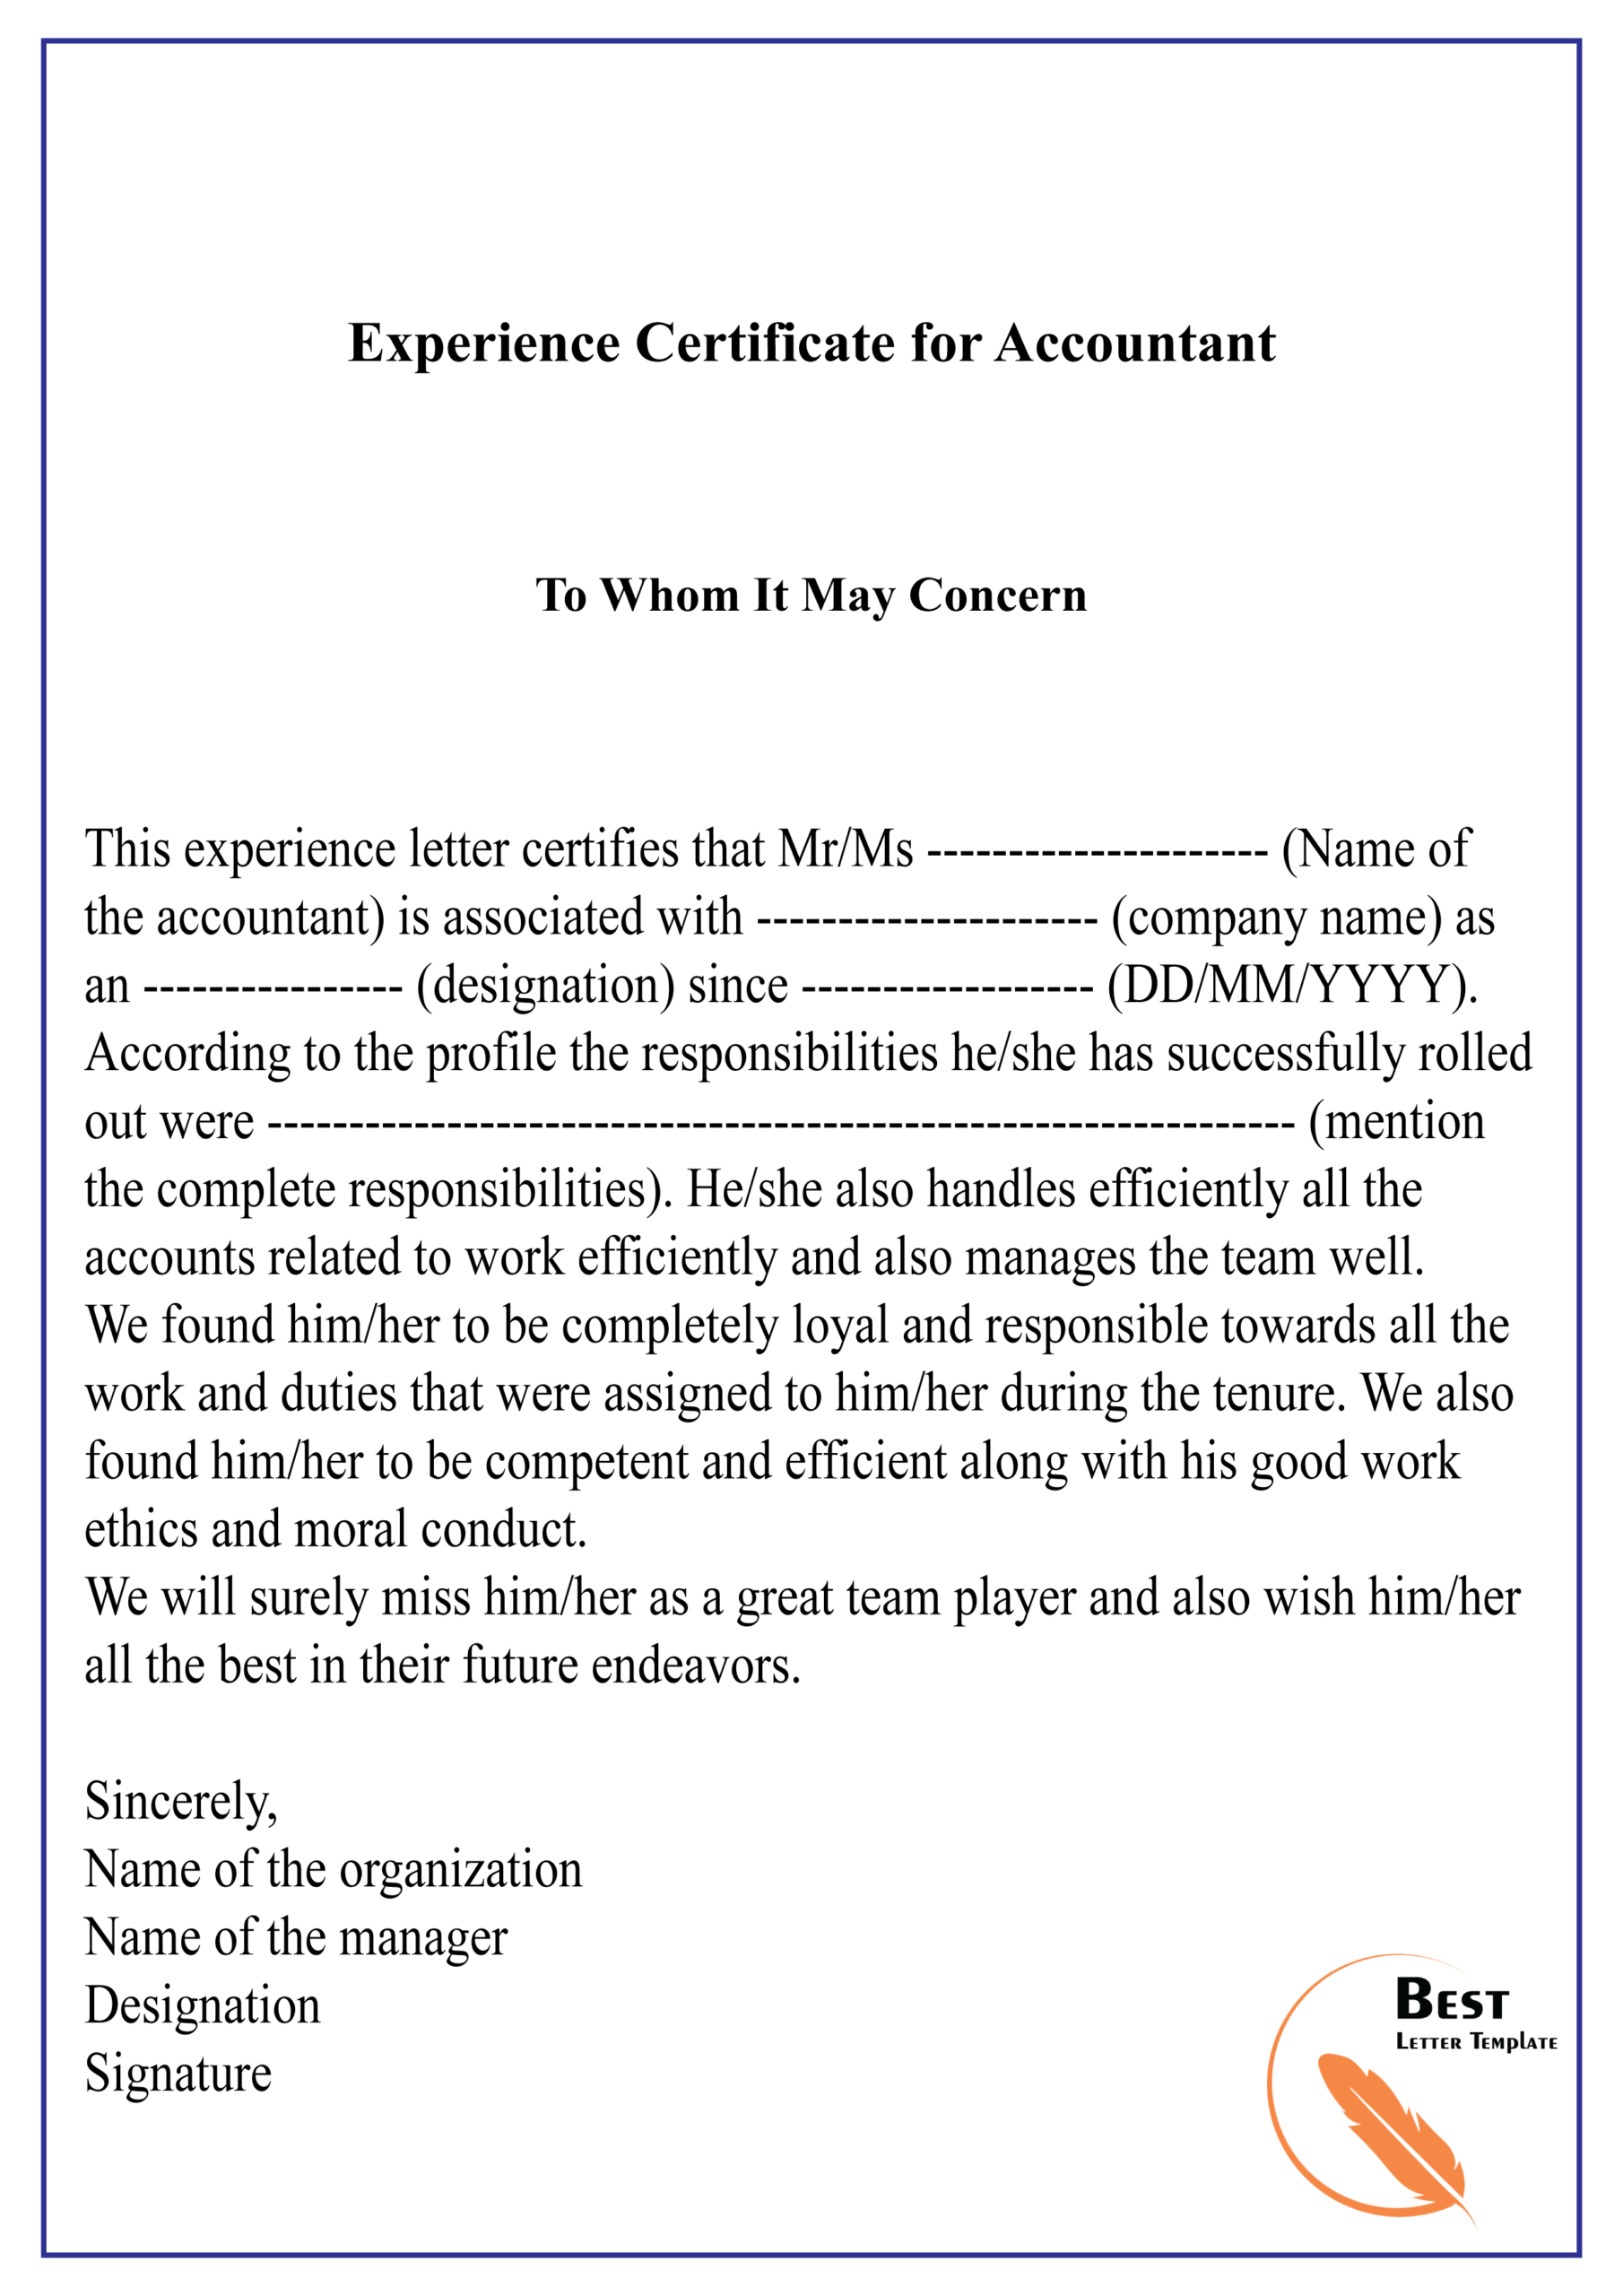 Experience Certificate For Accountant 01 | Best Letter Template Regarding Certificate Of Experience Template